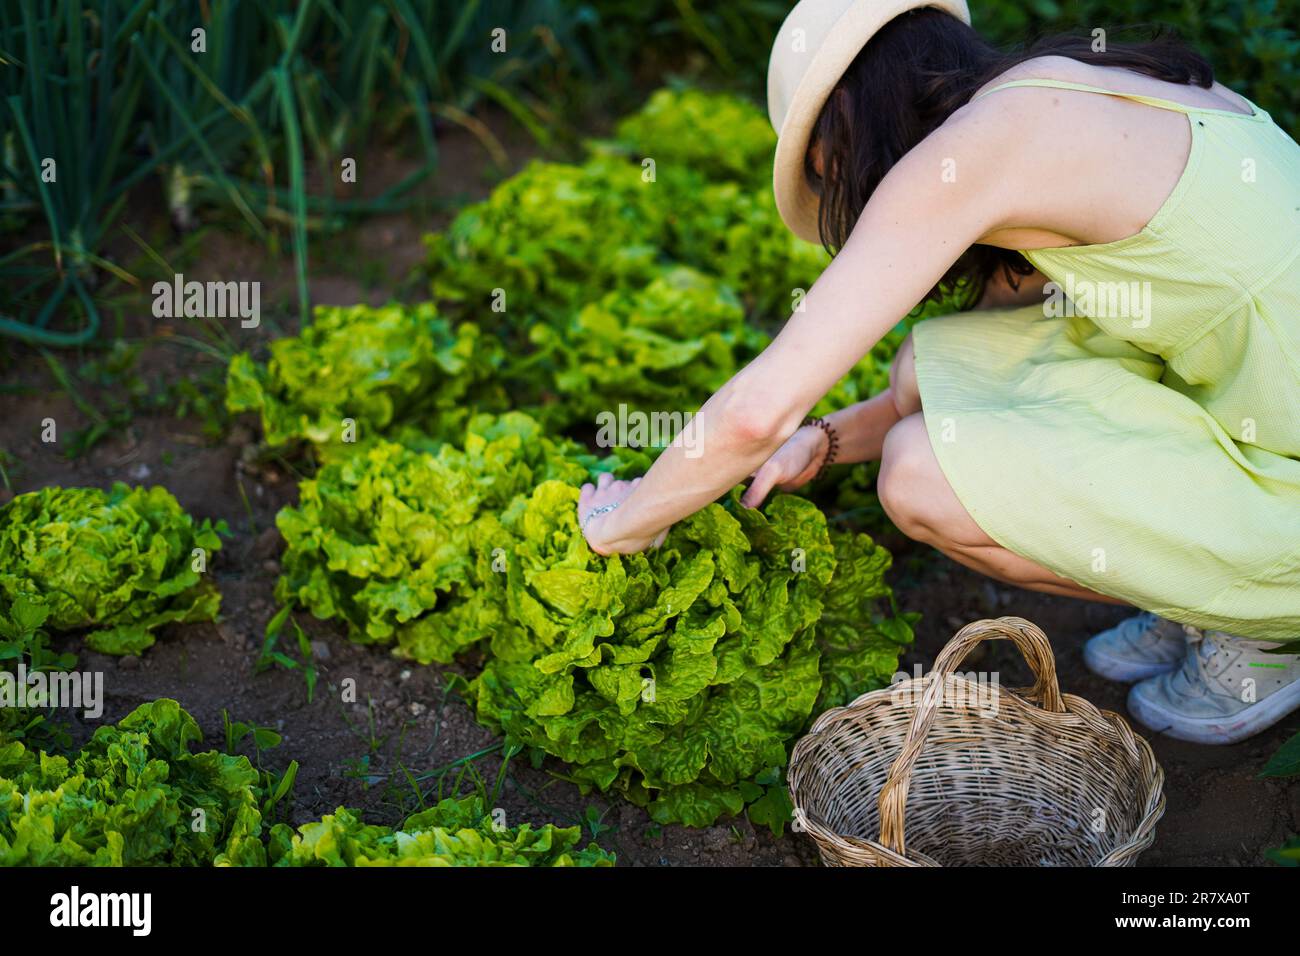 young woman farming lettuces on a basket with a green dress Stock Photo